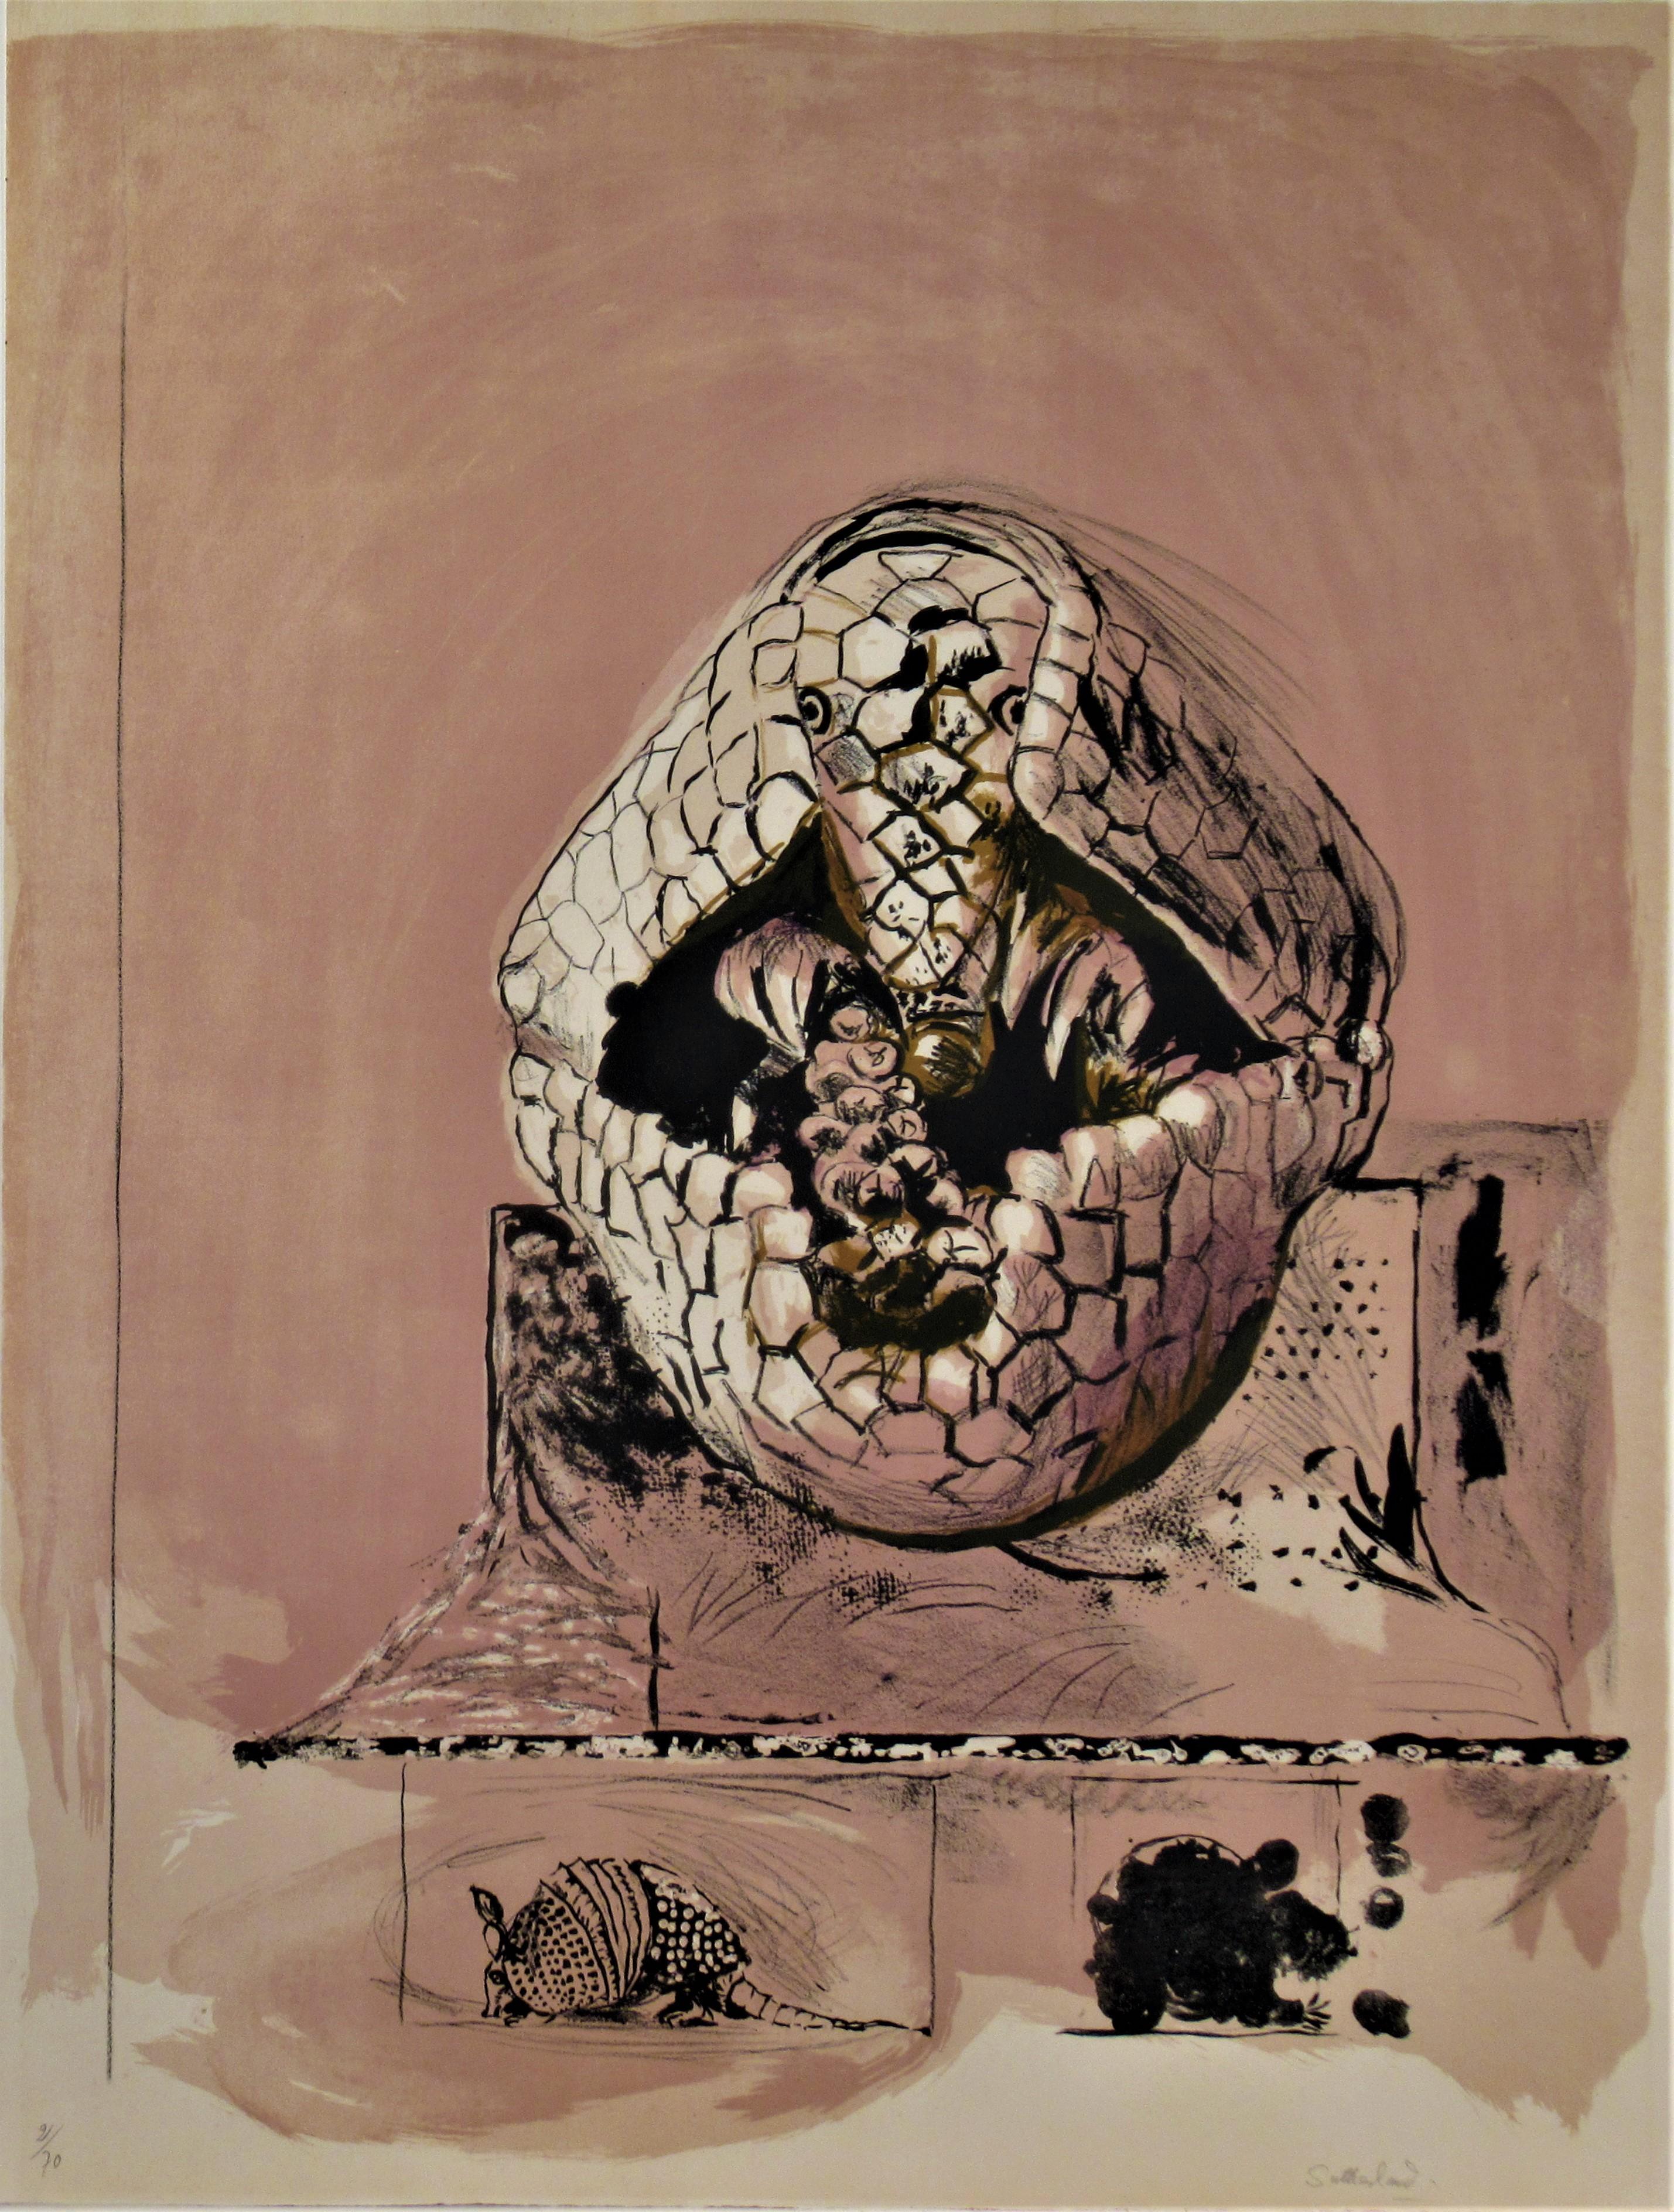 Graham Sutherland Animal Print - "Armadillo" from the suite "Bestiary and some Correspondences" 